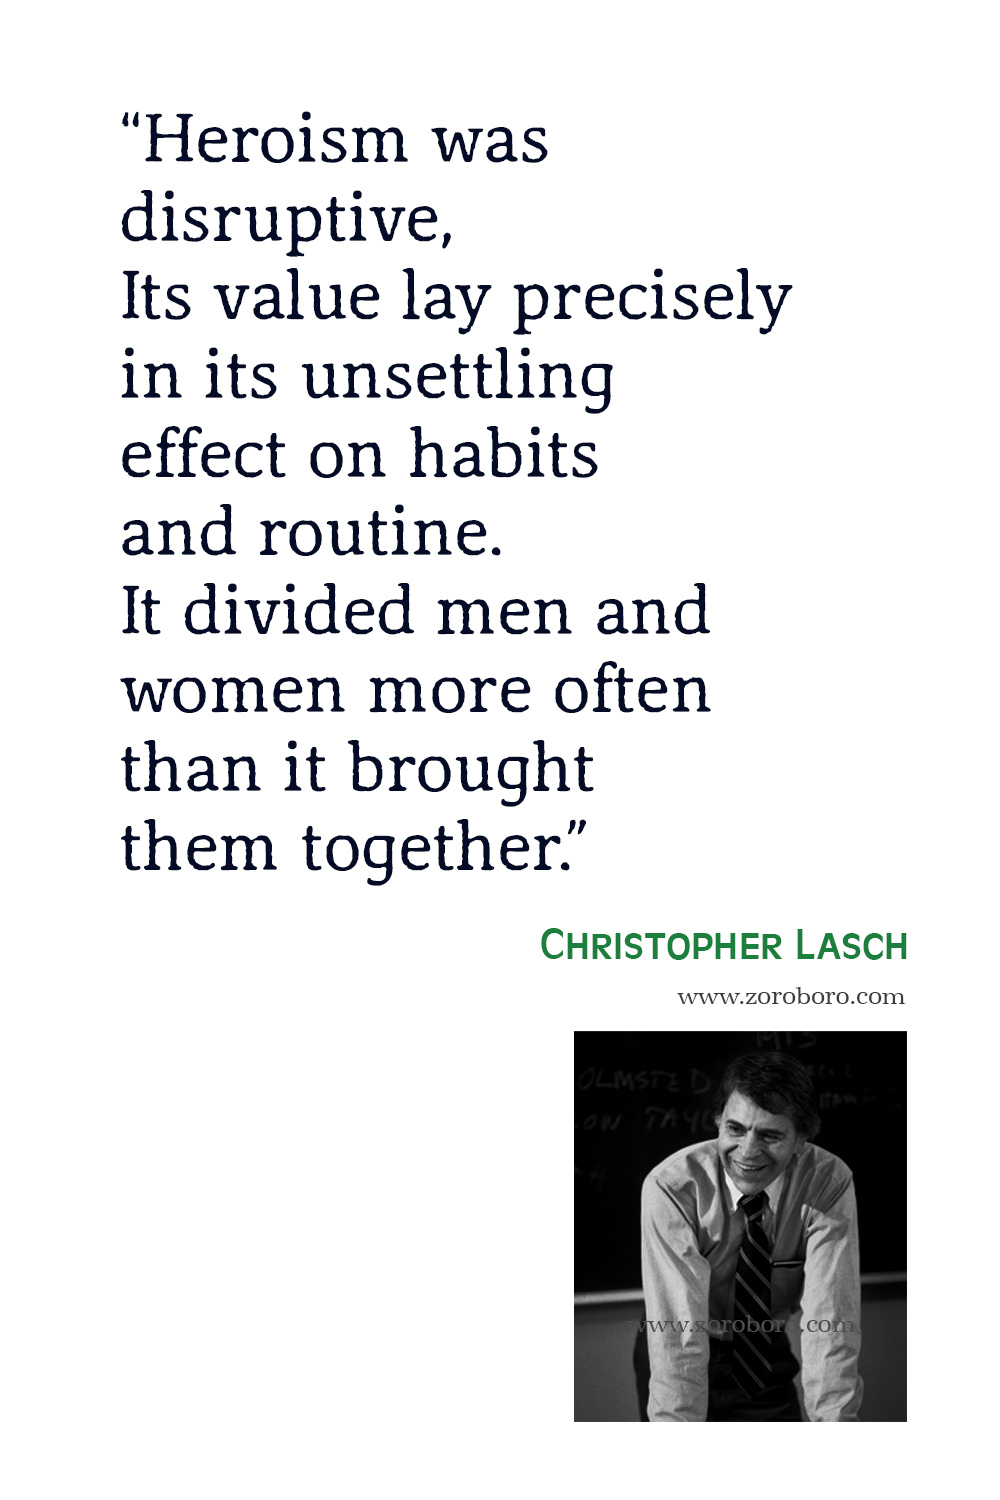 Christopher Lasch Quotes, Christopher Lasch The Culture of Narcissism Quotes, Christopher Lasch Books, Christopher Lasch.